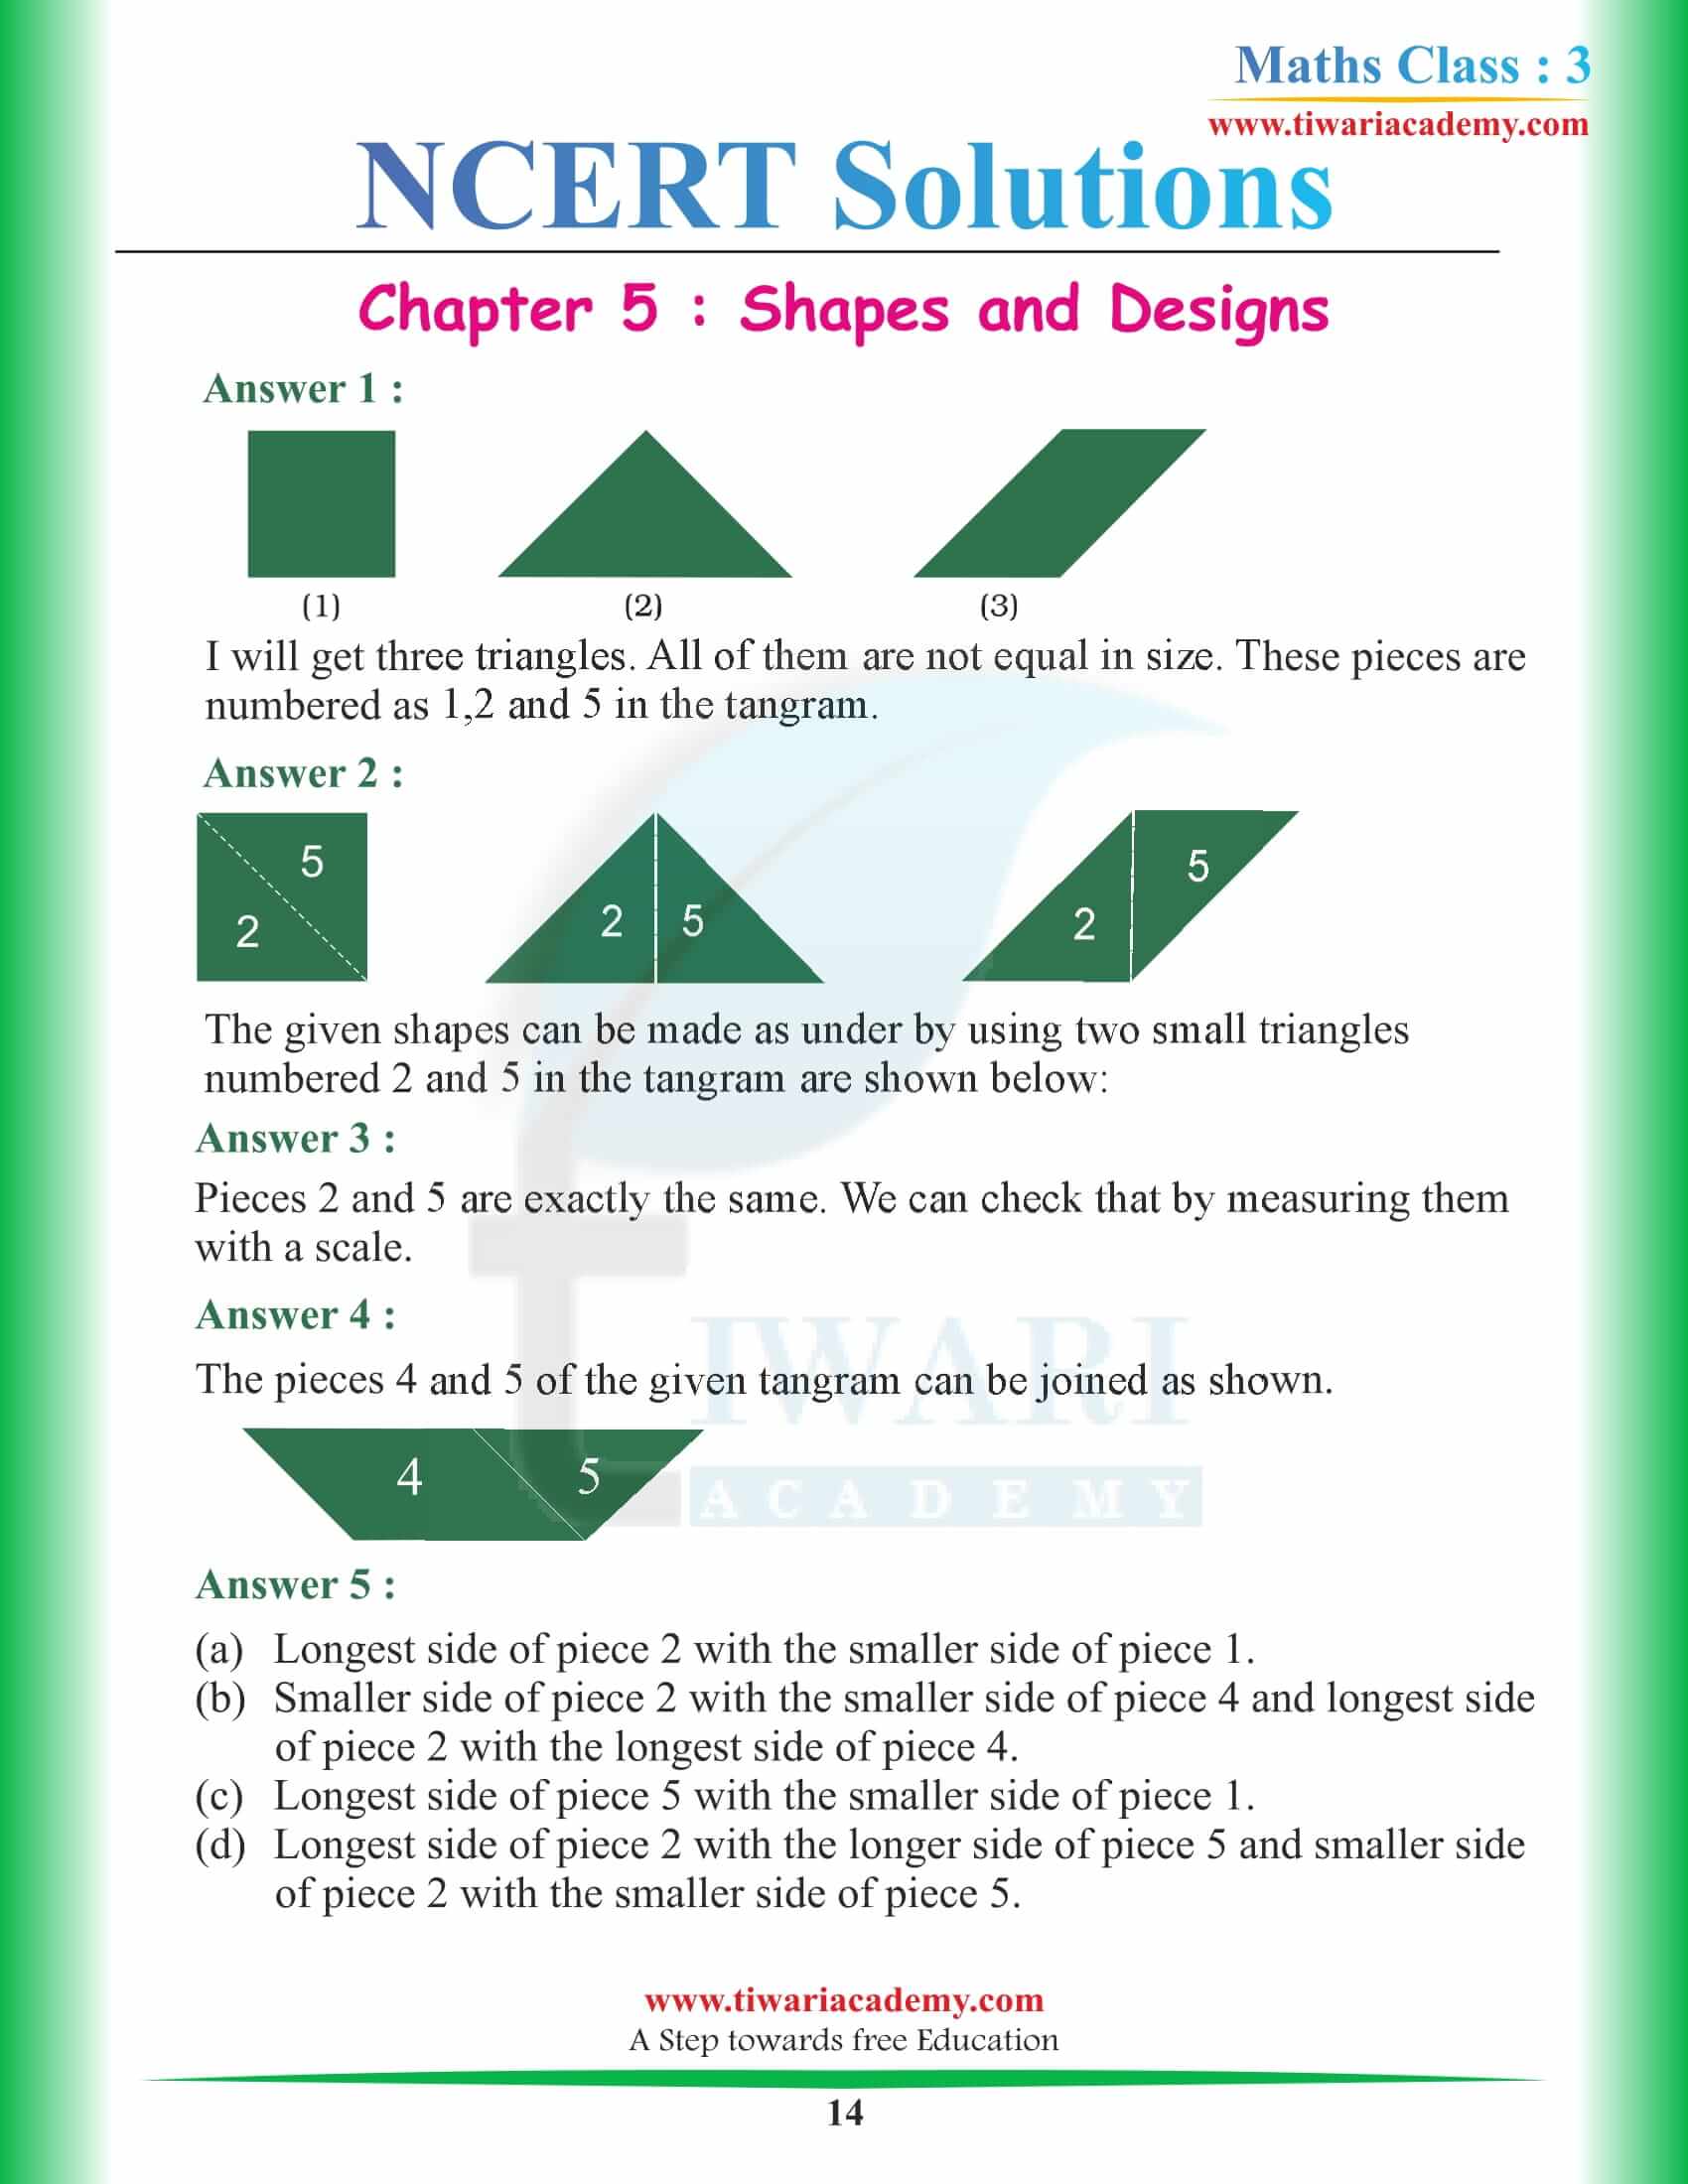 Class 3 Maths Chapter 5 guide and answers